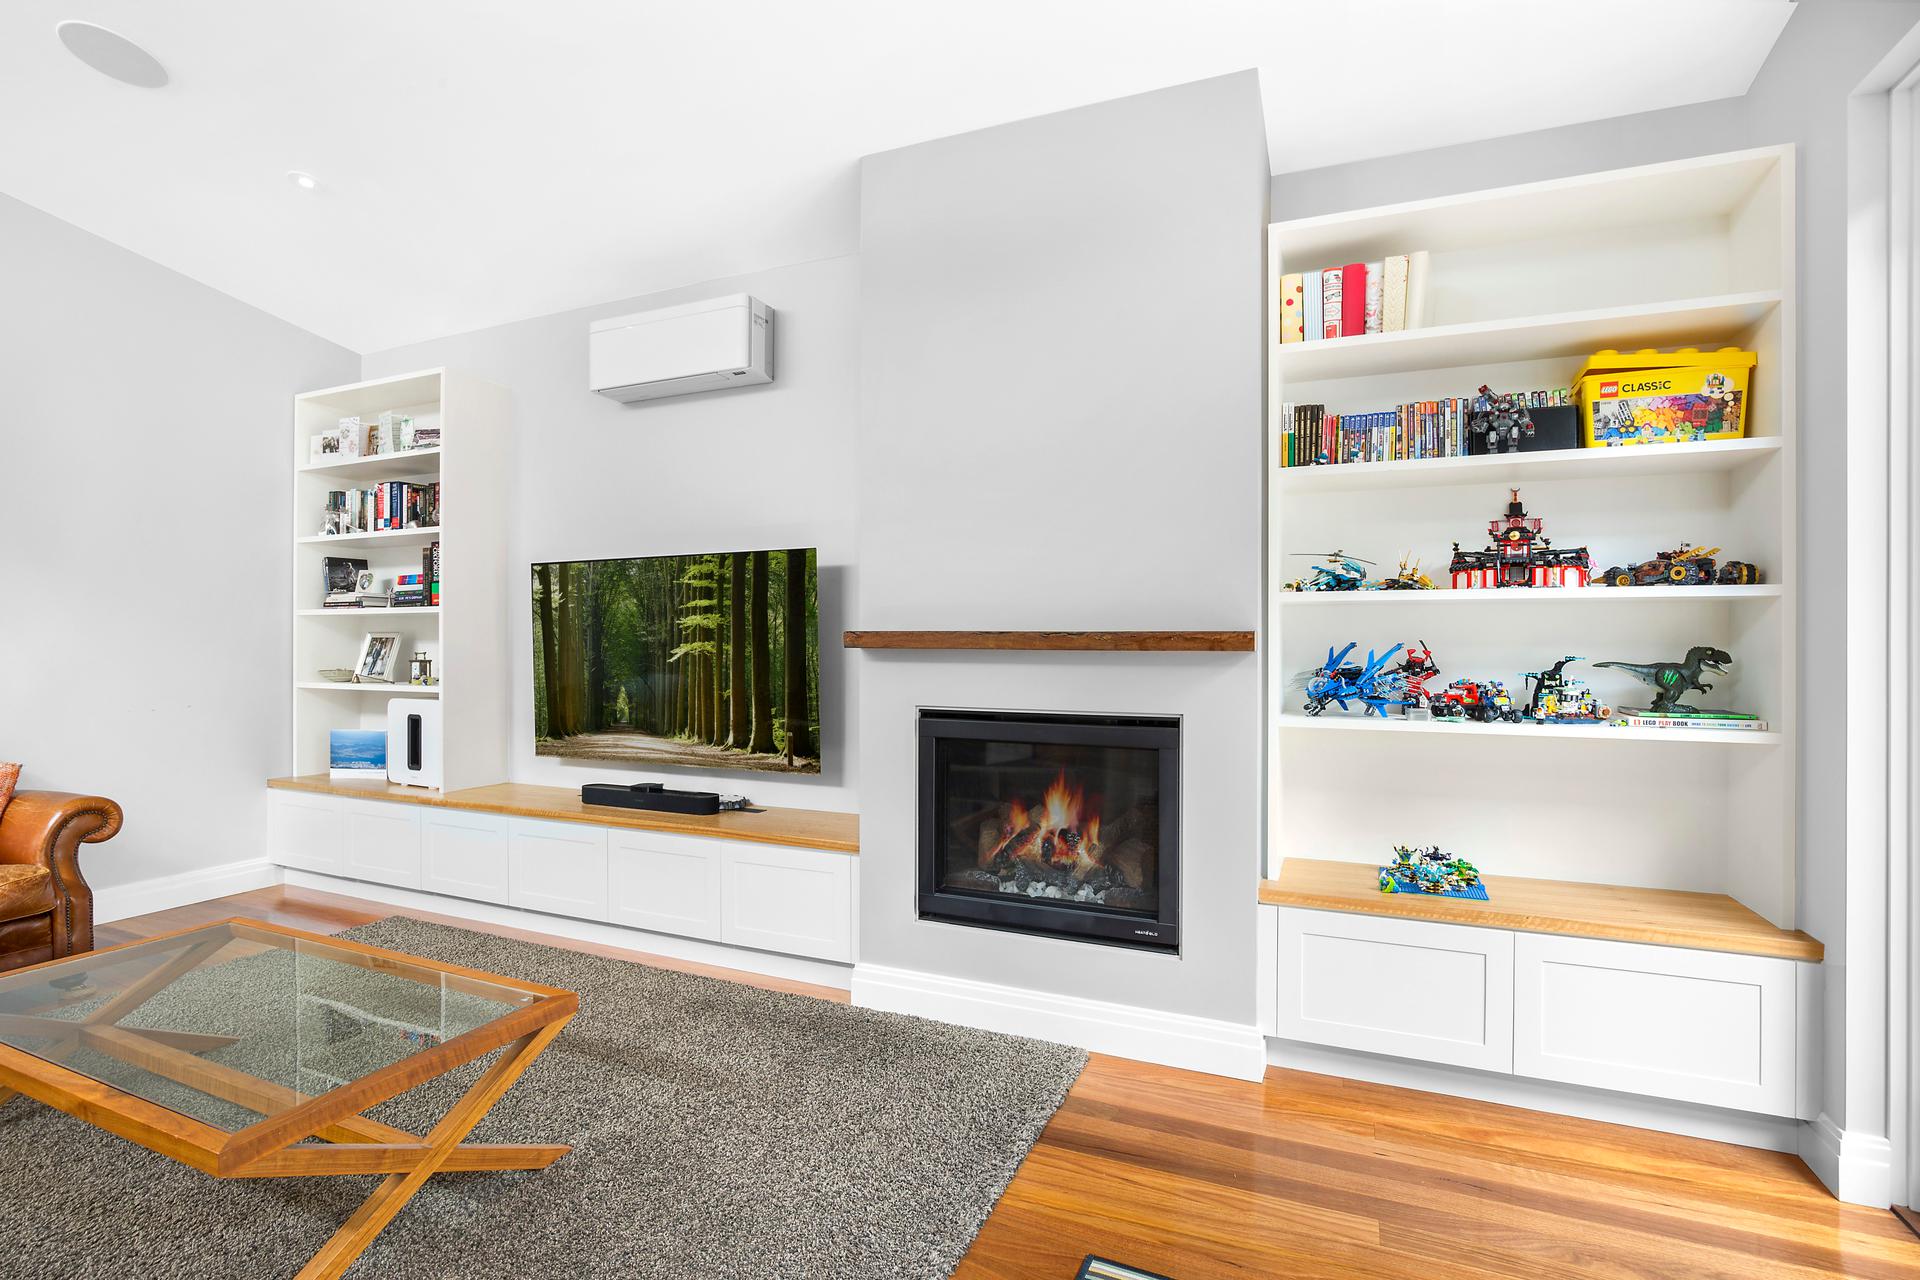 Shaker Style AV Unit with open shelving and a Veneer Benchtop - Annandale, Sydney